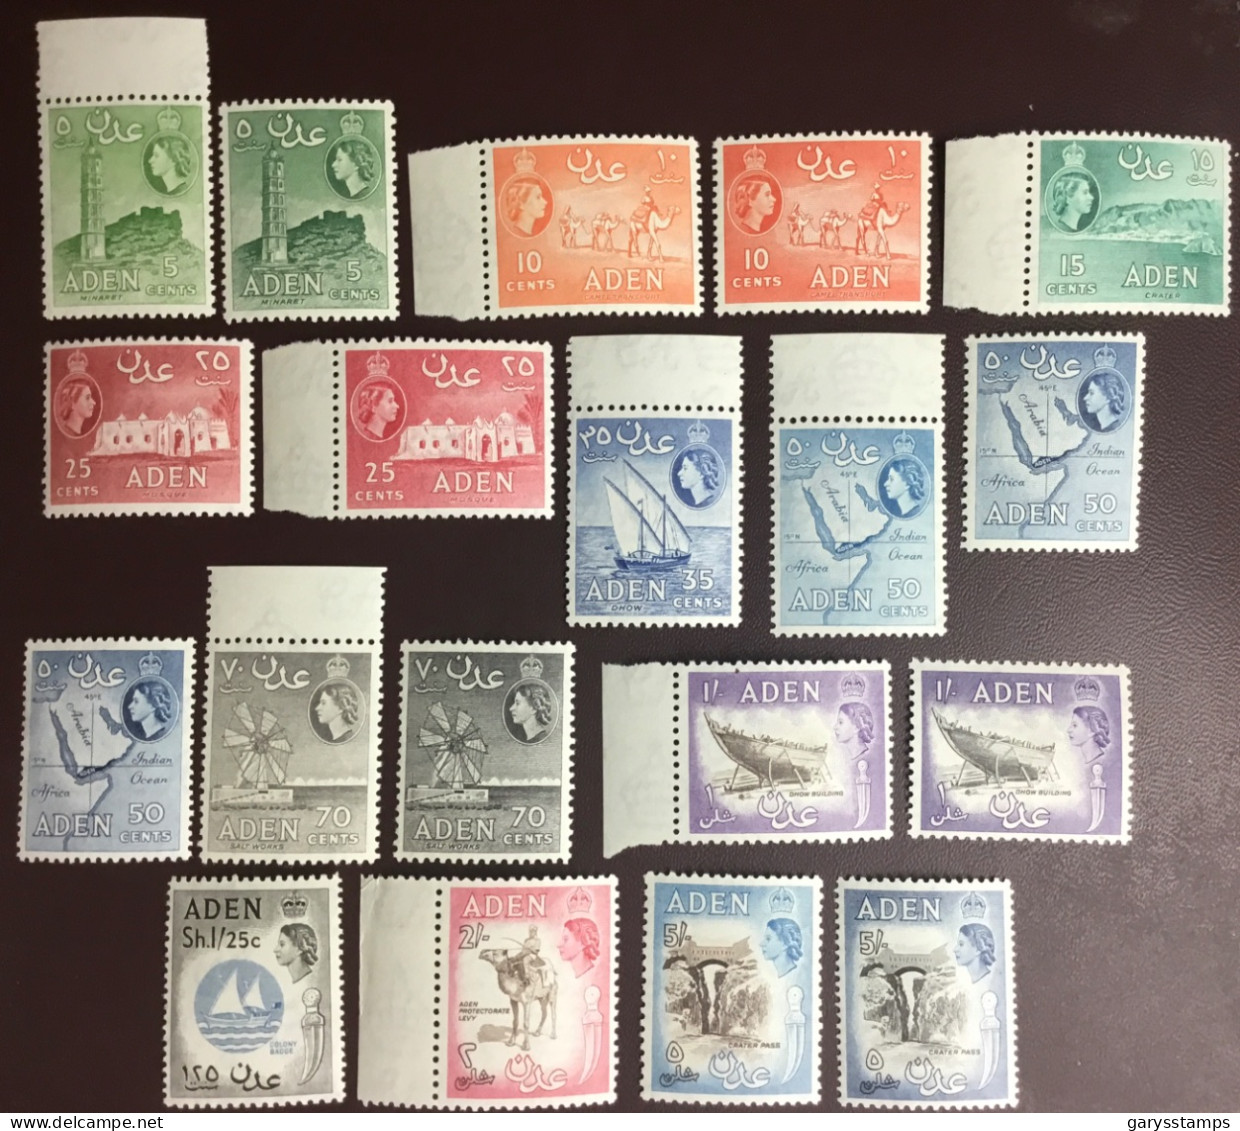 Aden 1953 - 1963 Definitives Set To 5s With Many Varieties MNH - Aden (1854-1963)